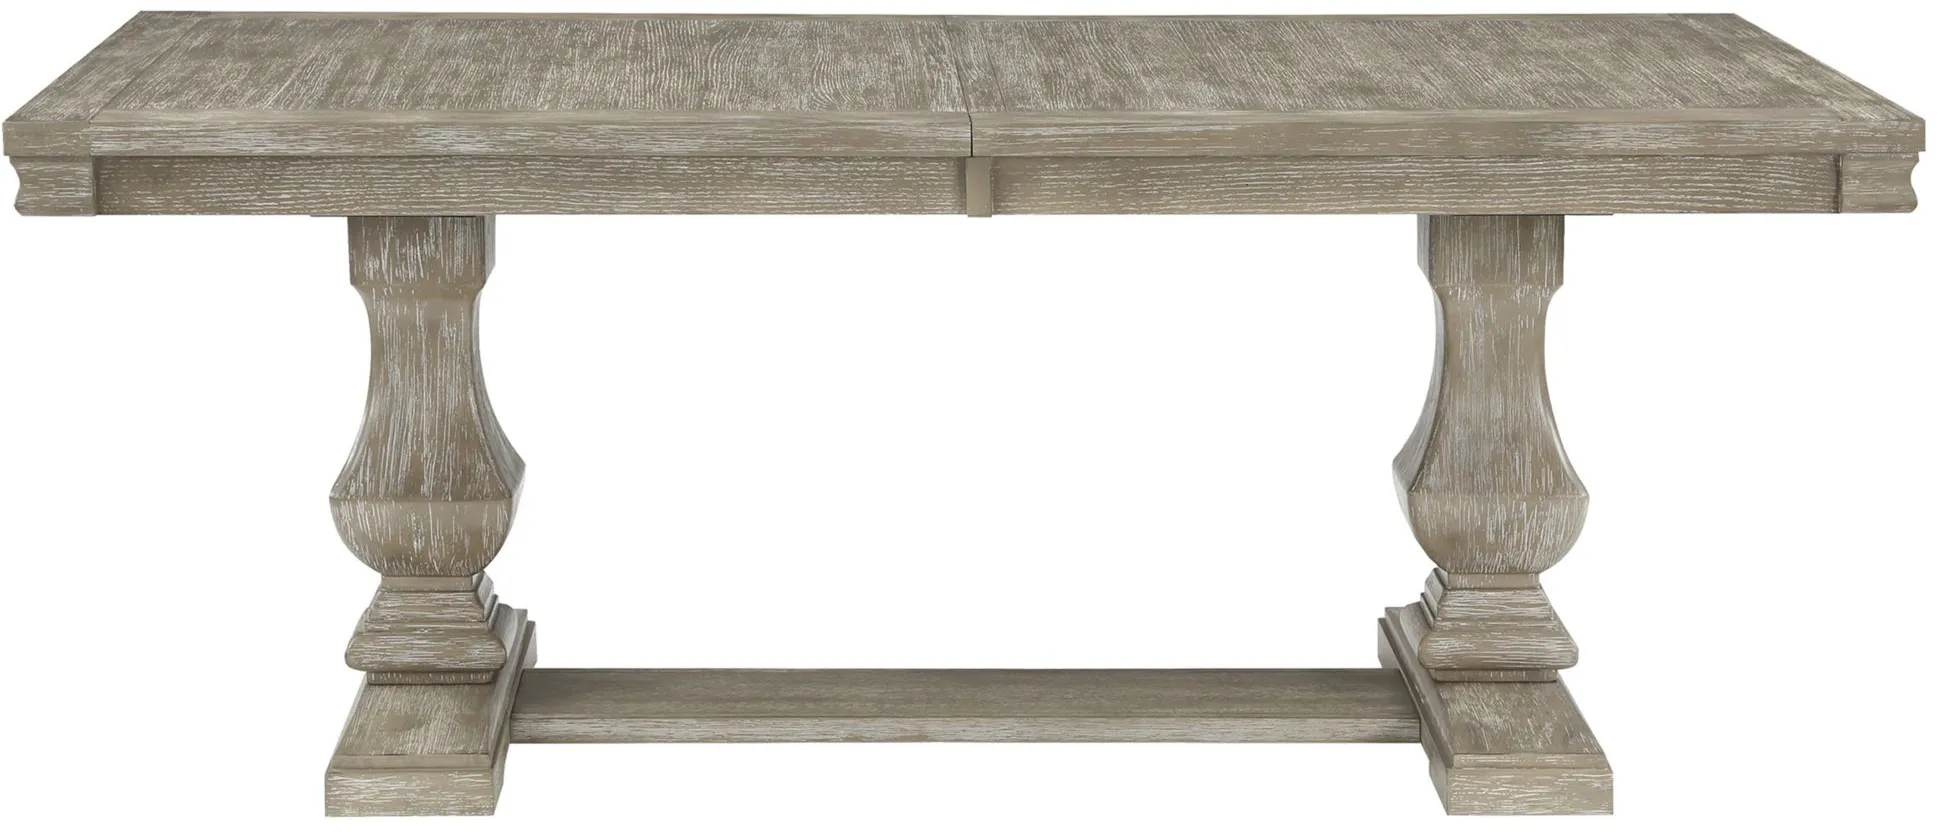 Balin Dining Room Table in Brownish Gray by Homelegance